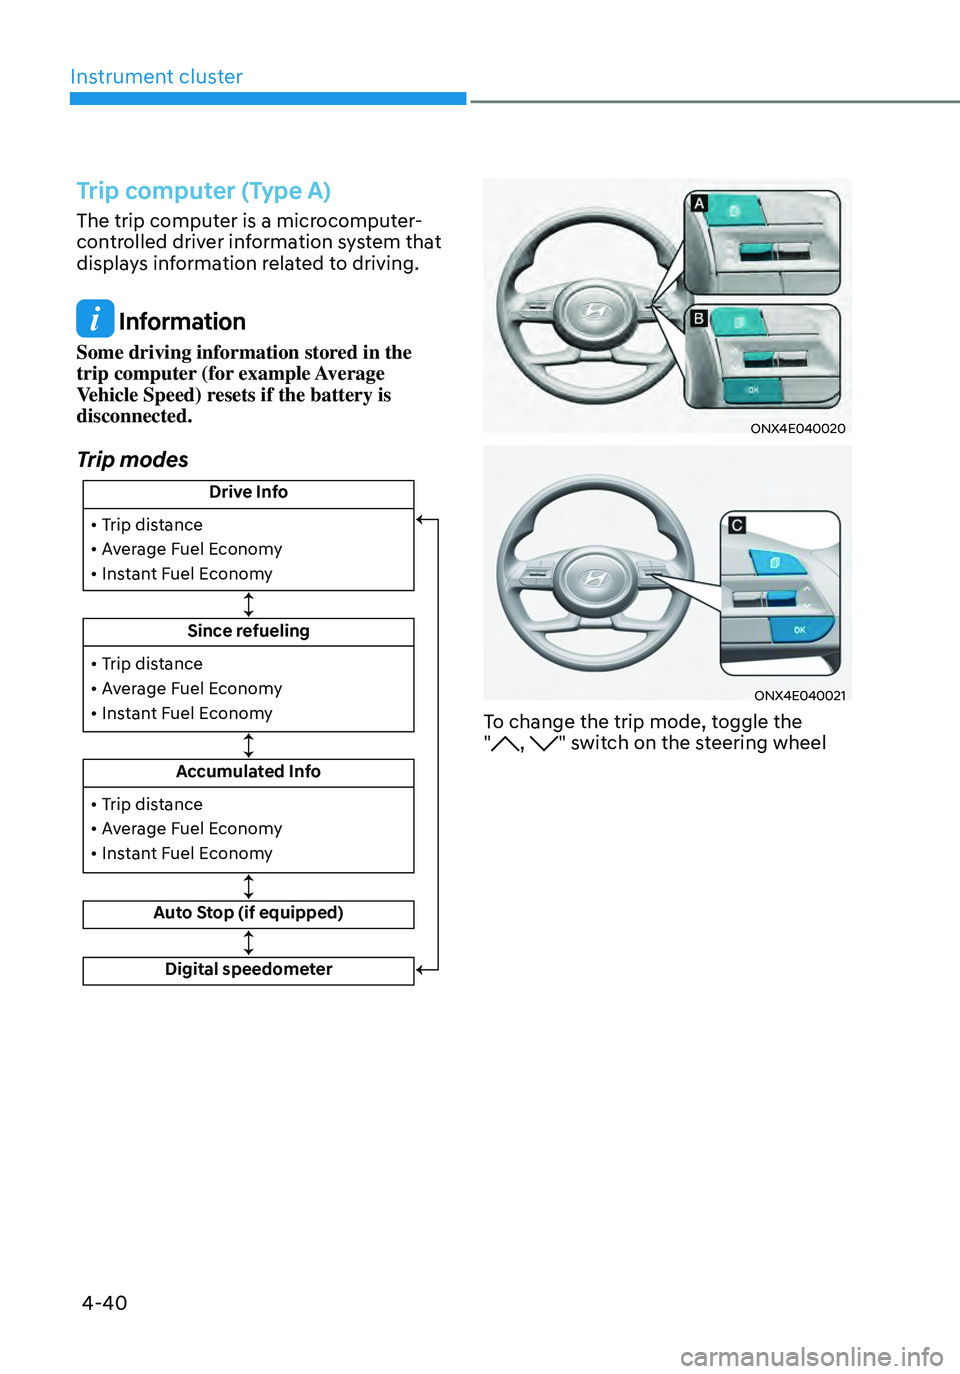 HYUNDAI TUCSON 2023  Owners Manual Instrument cluster
4-40
Trip computer (Type A)
The trip computer is a microcomputer-
controlled driver information system that 
displays information related to driving.
 Information
Some driving infor